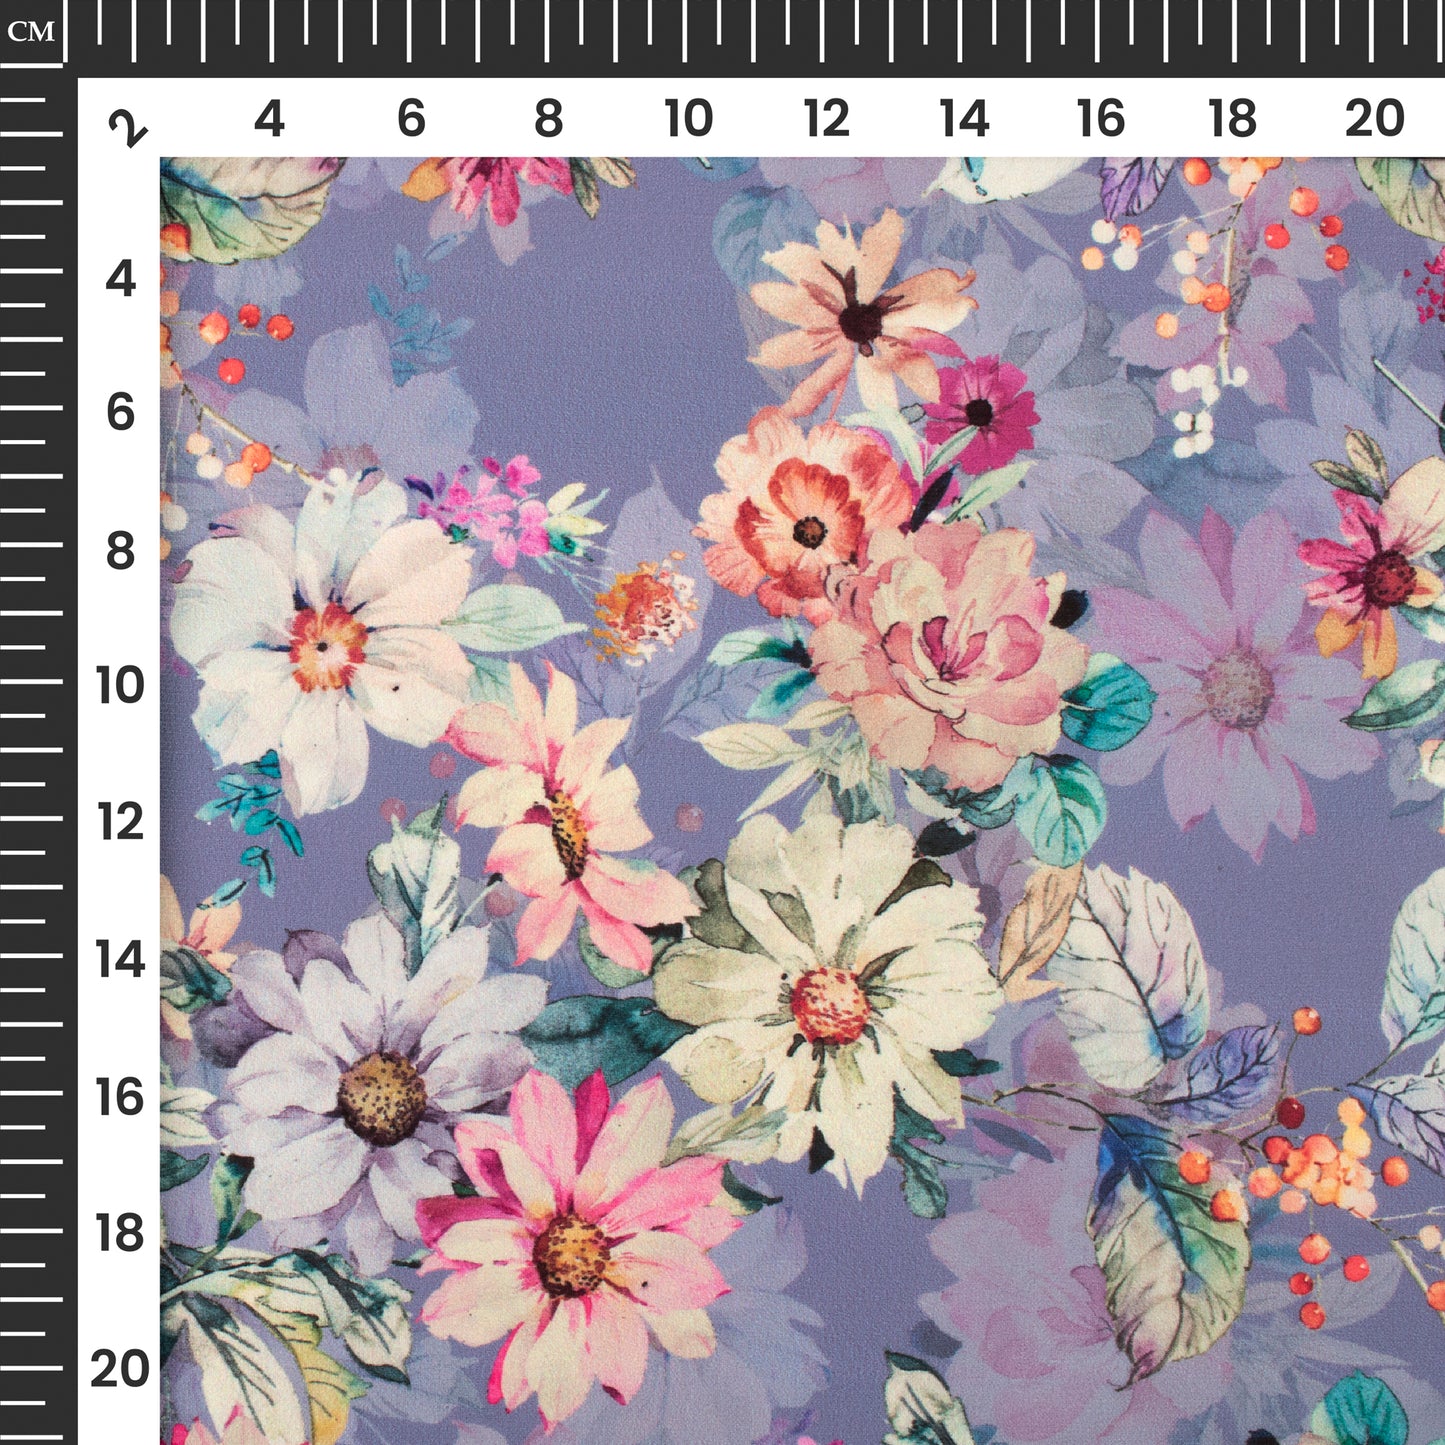 Heather Purple And White Floral Digital Print BSY Crepe Fabric